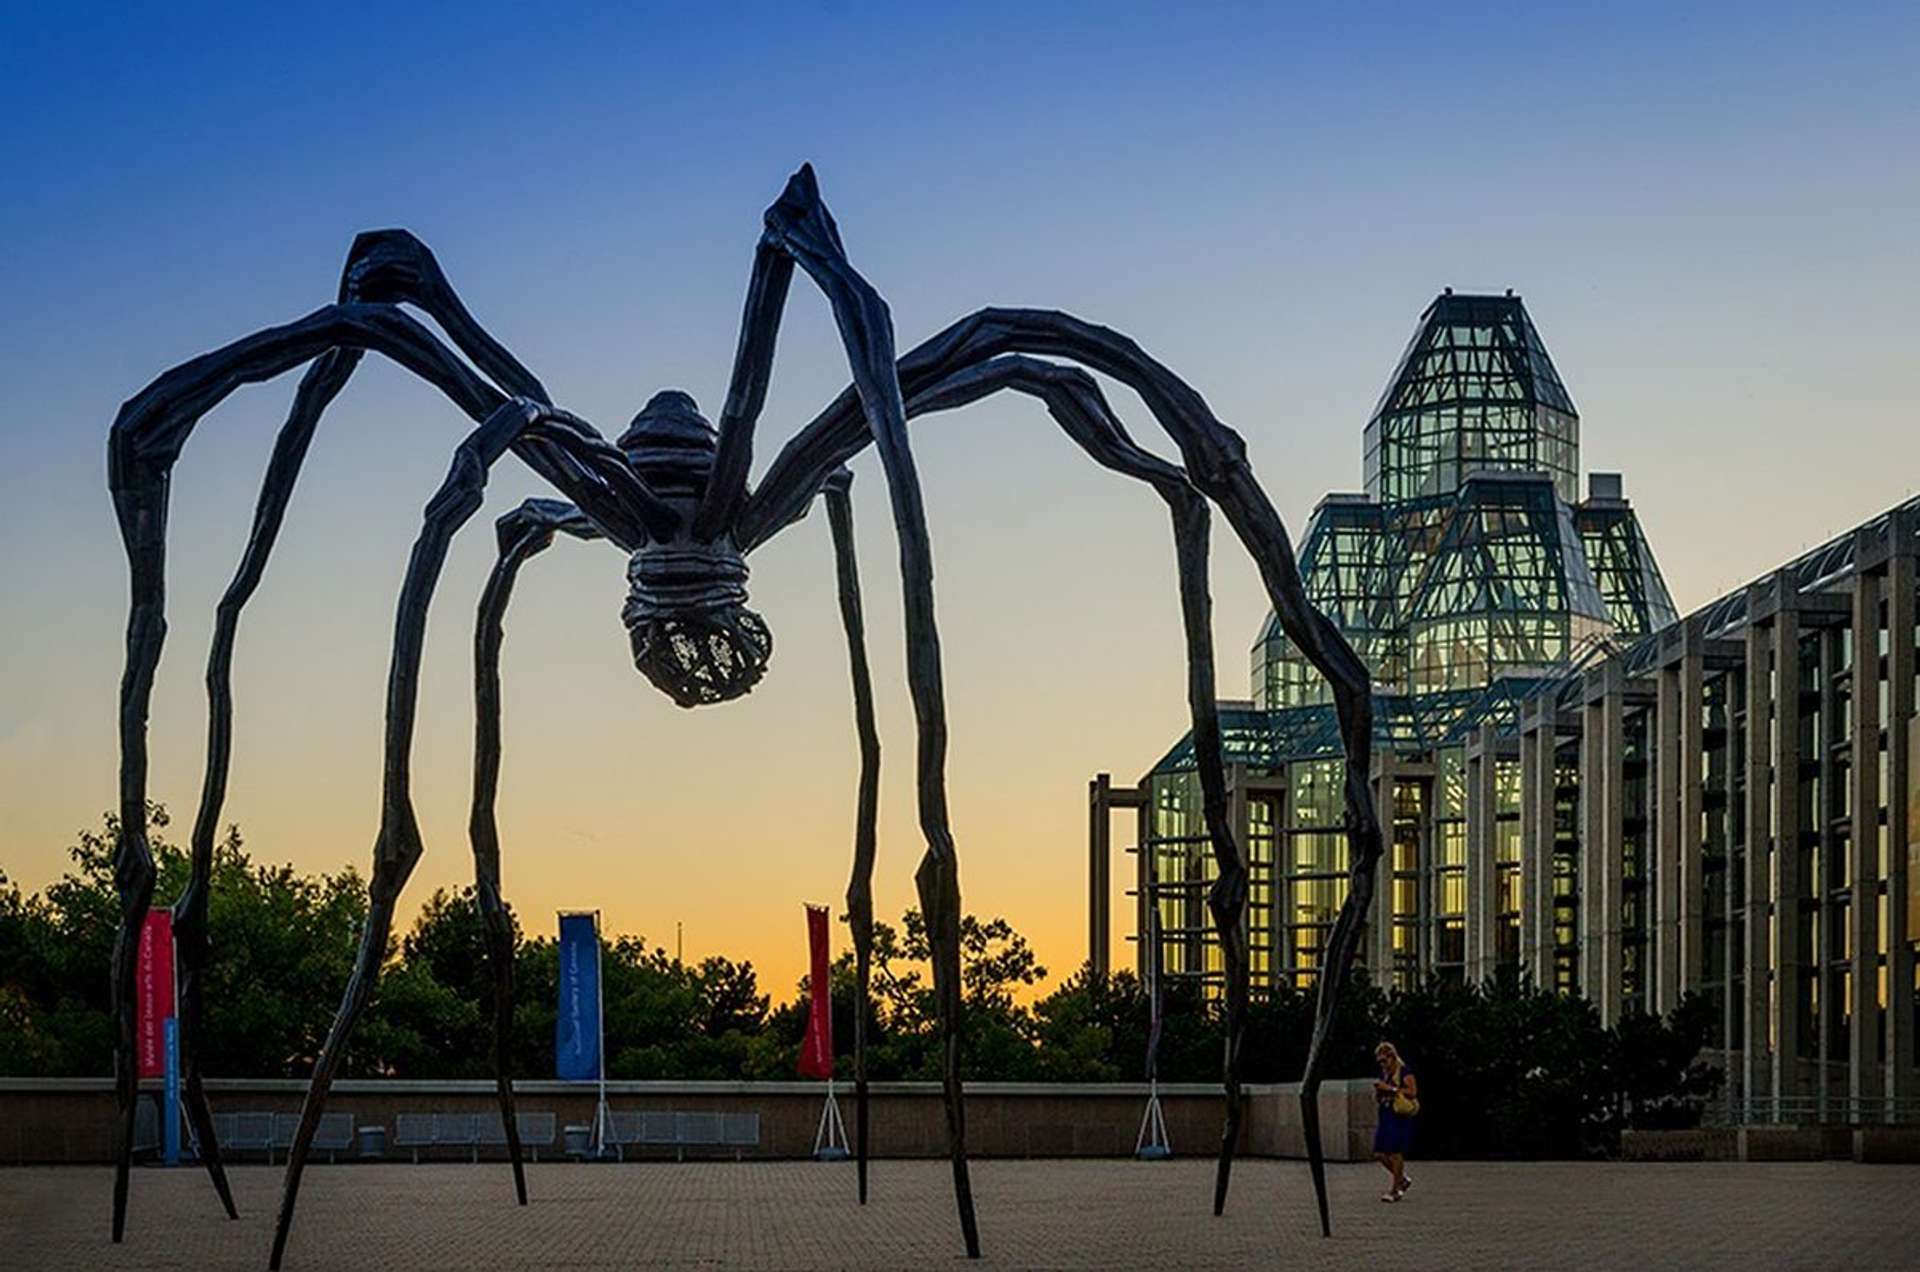 Louise Bourgeois' Maman spider sculpture. An oversized spider sculpture is pictured against a sunset and building, in Canada.